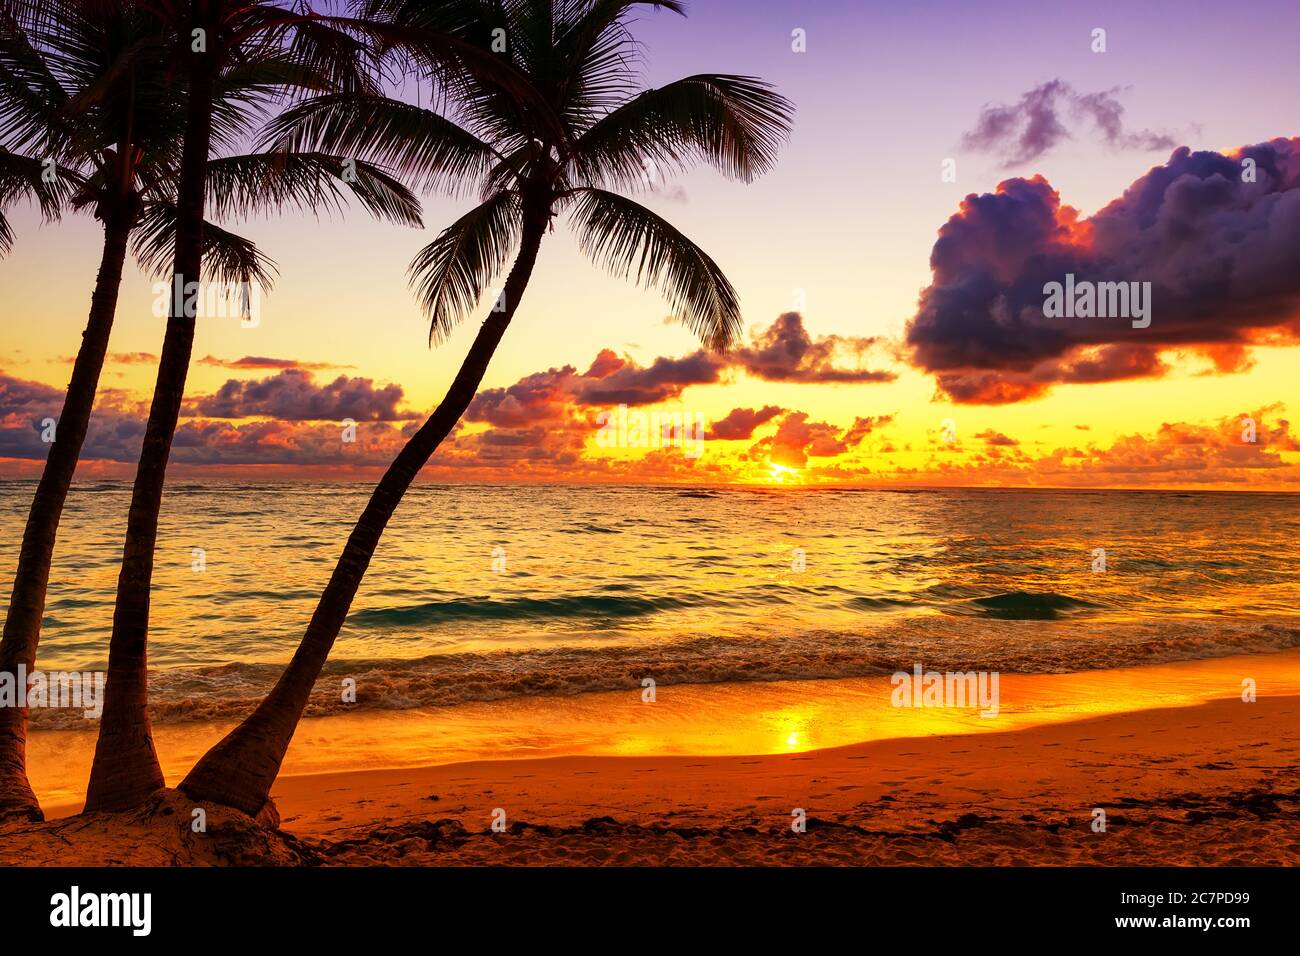 Coconut palm trees against colorful sunset in Punta Cana, Dominican Republic Stock Photo